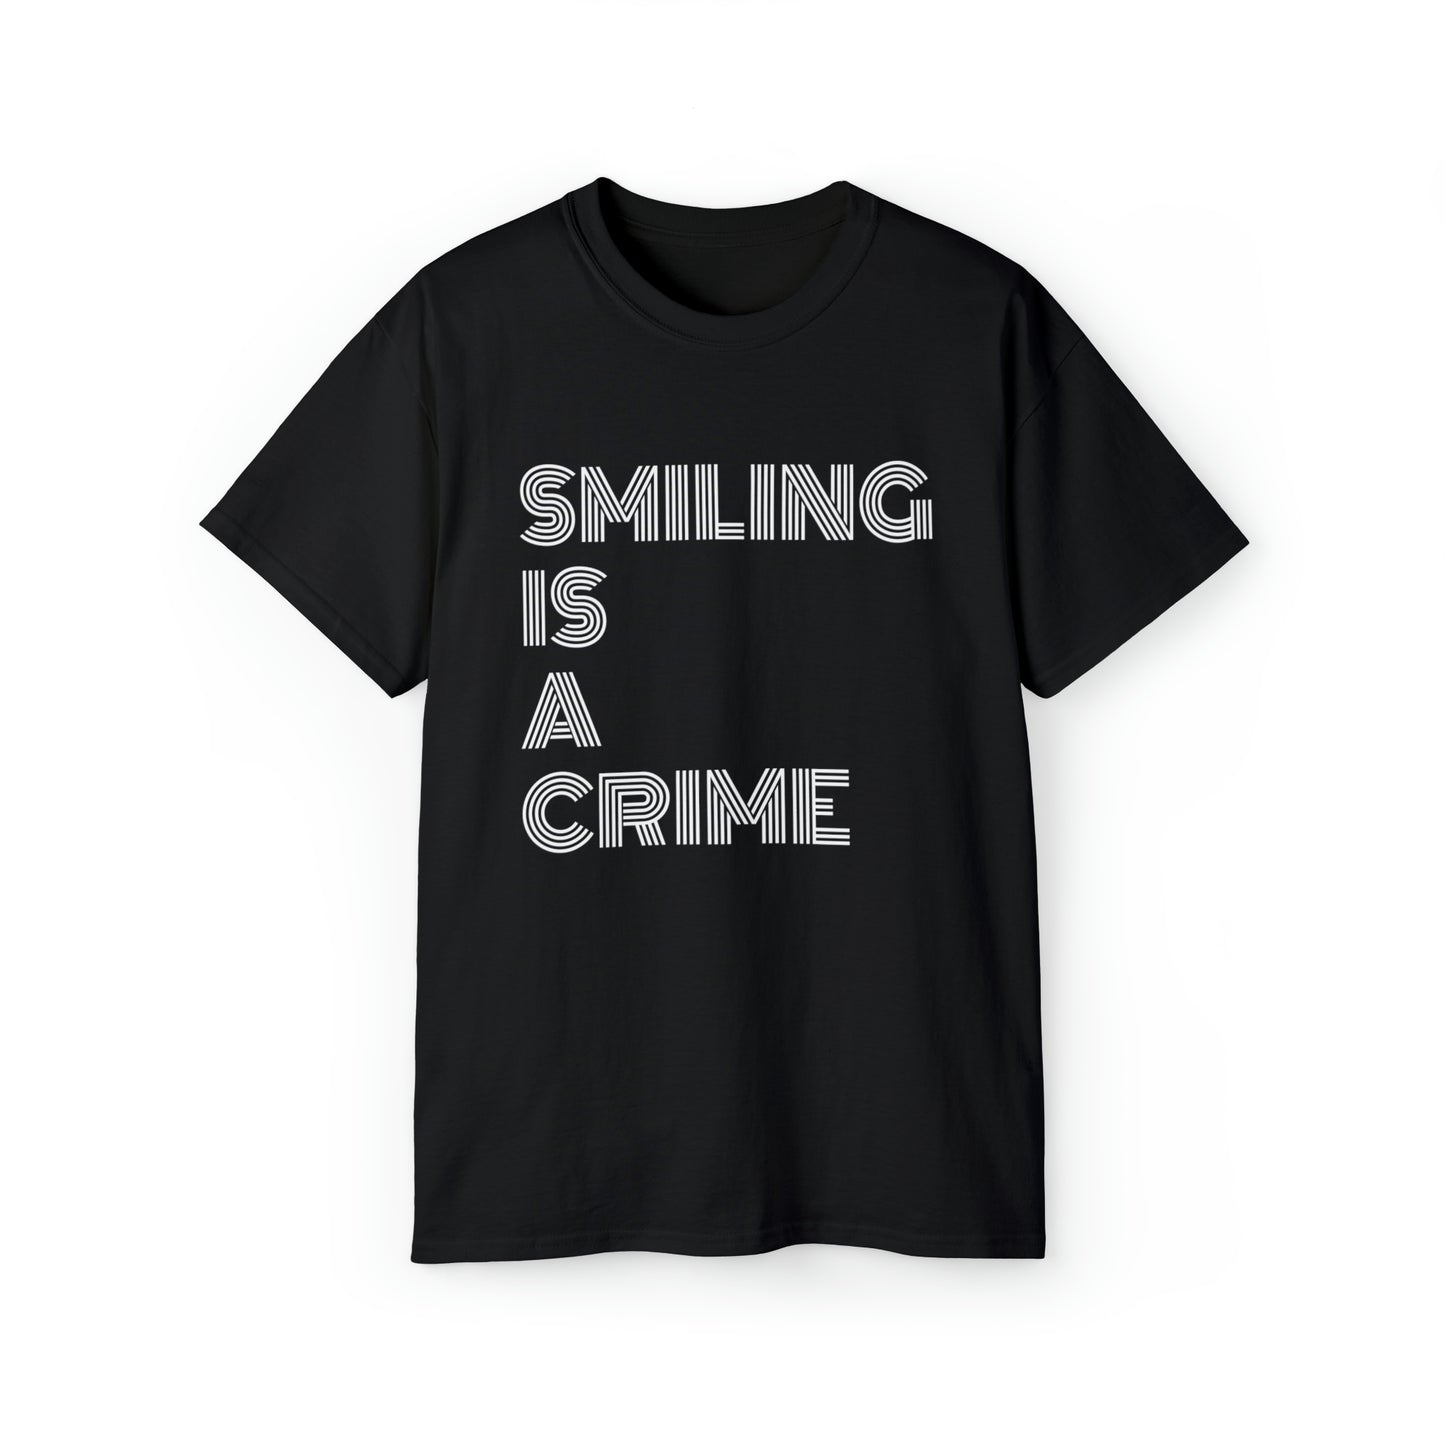 Smiling is a crime tshirt